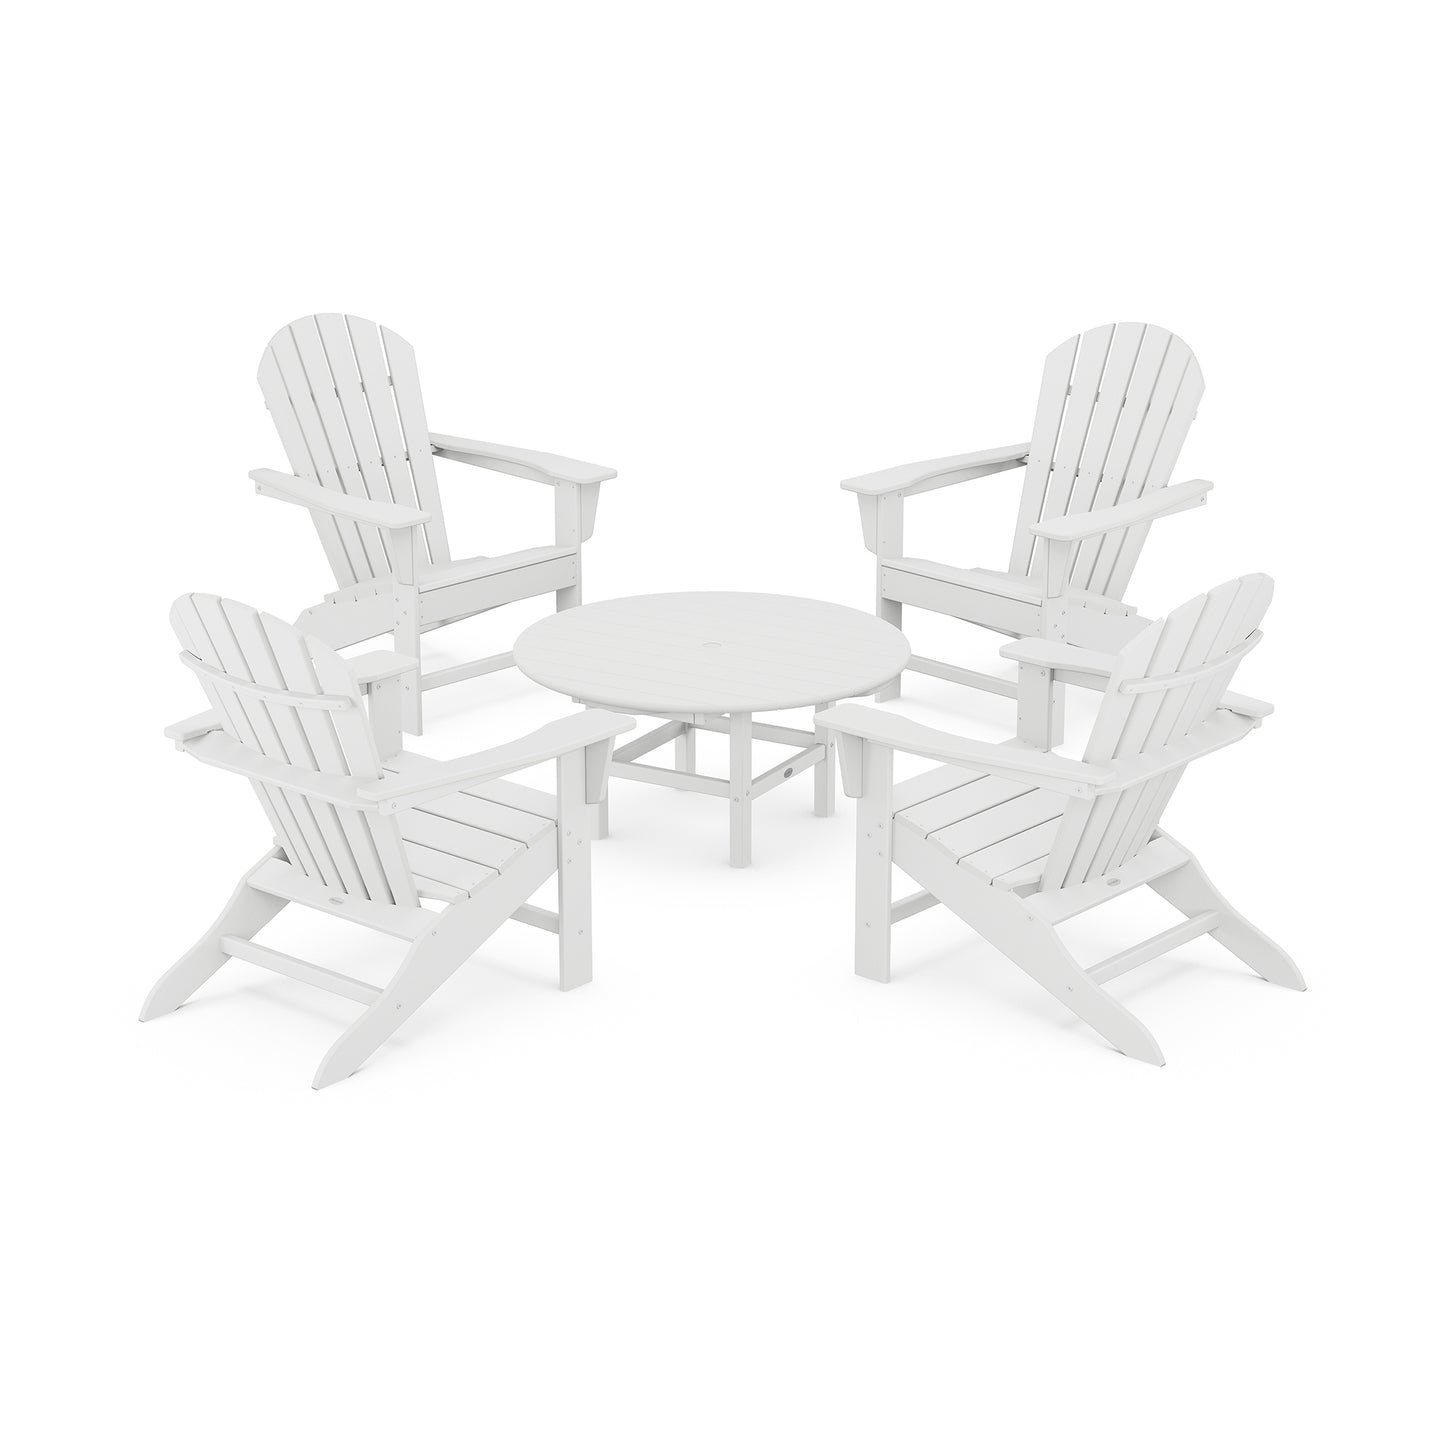 Four white POLYWOOD South Beach Adirondack-style chairs arranged around a small round table, all positioned on a plain white background. The furniture setup suggests an outdoor relaxation area.